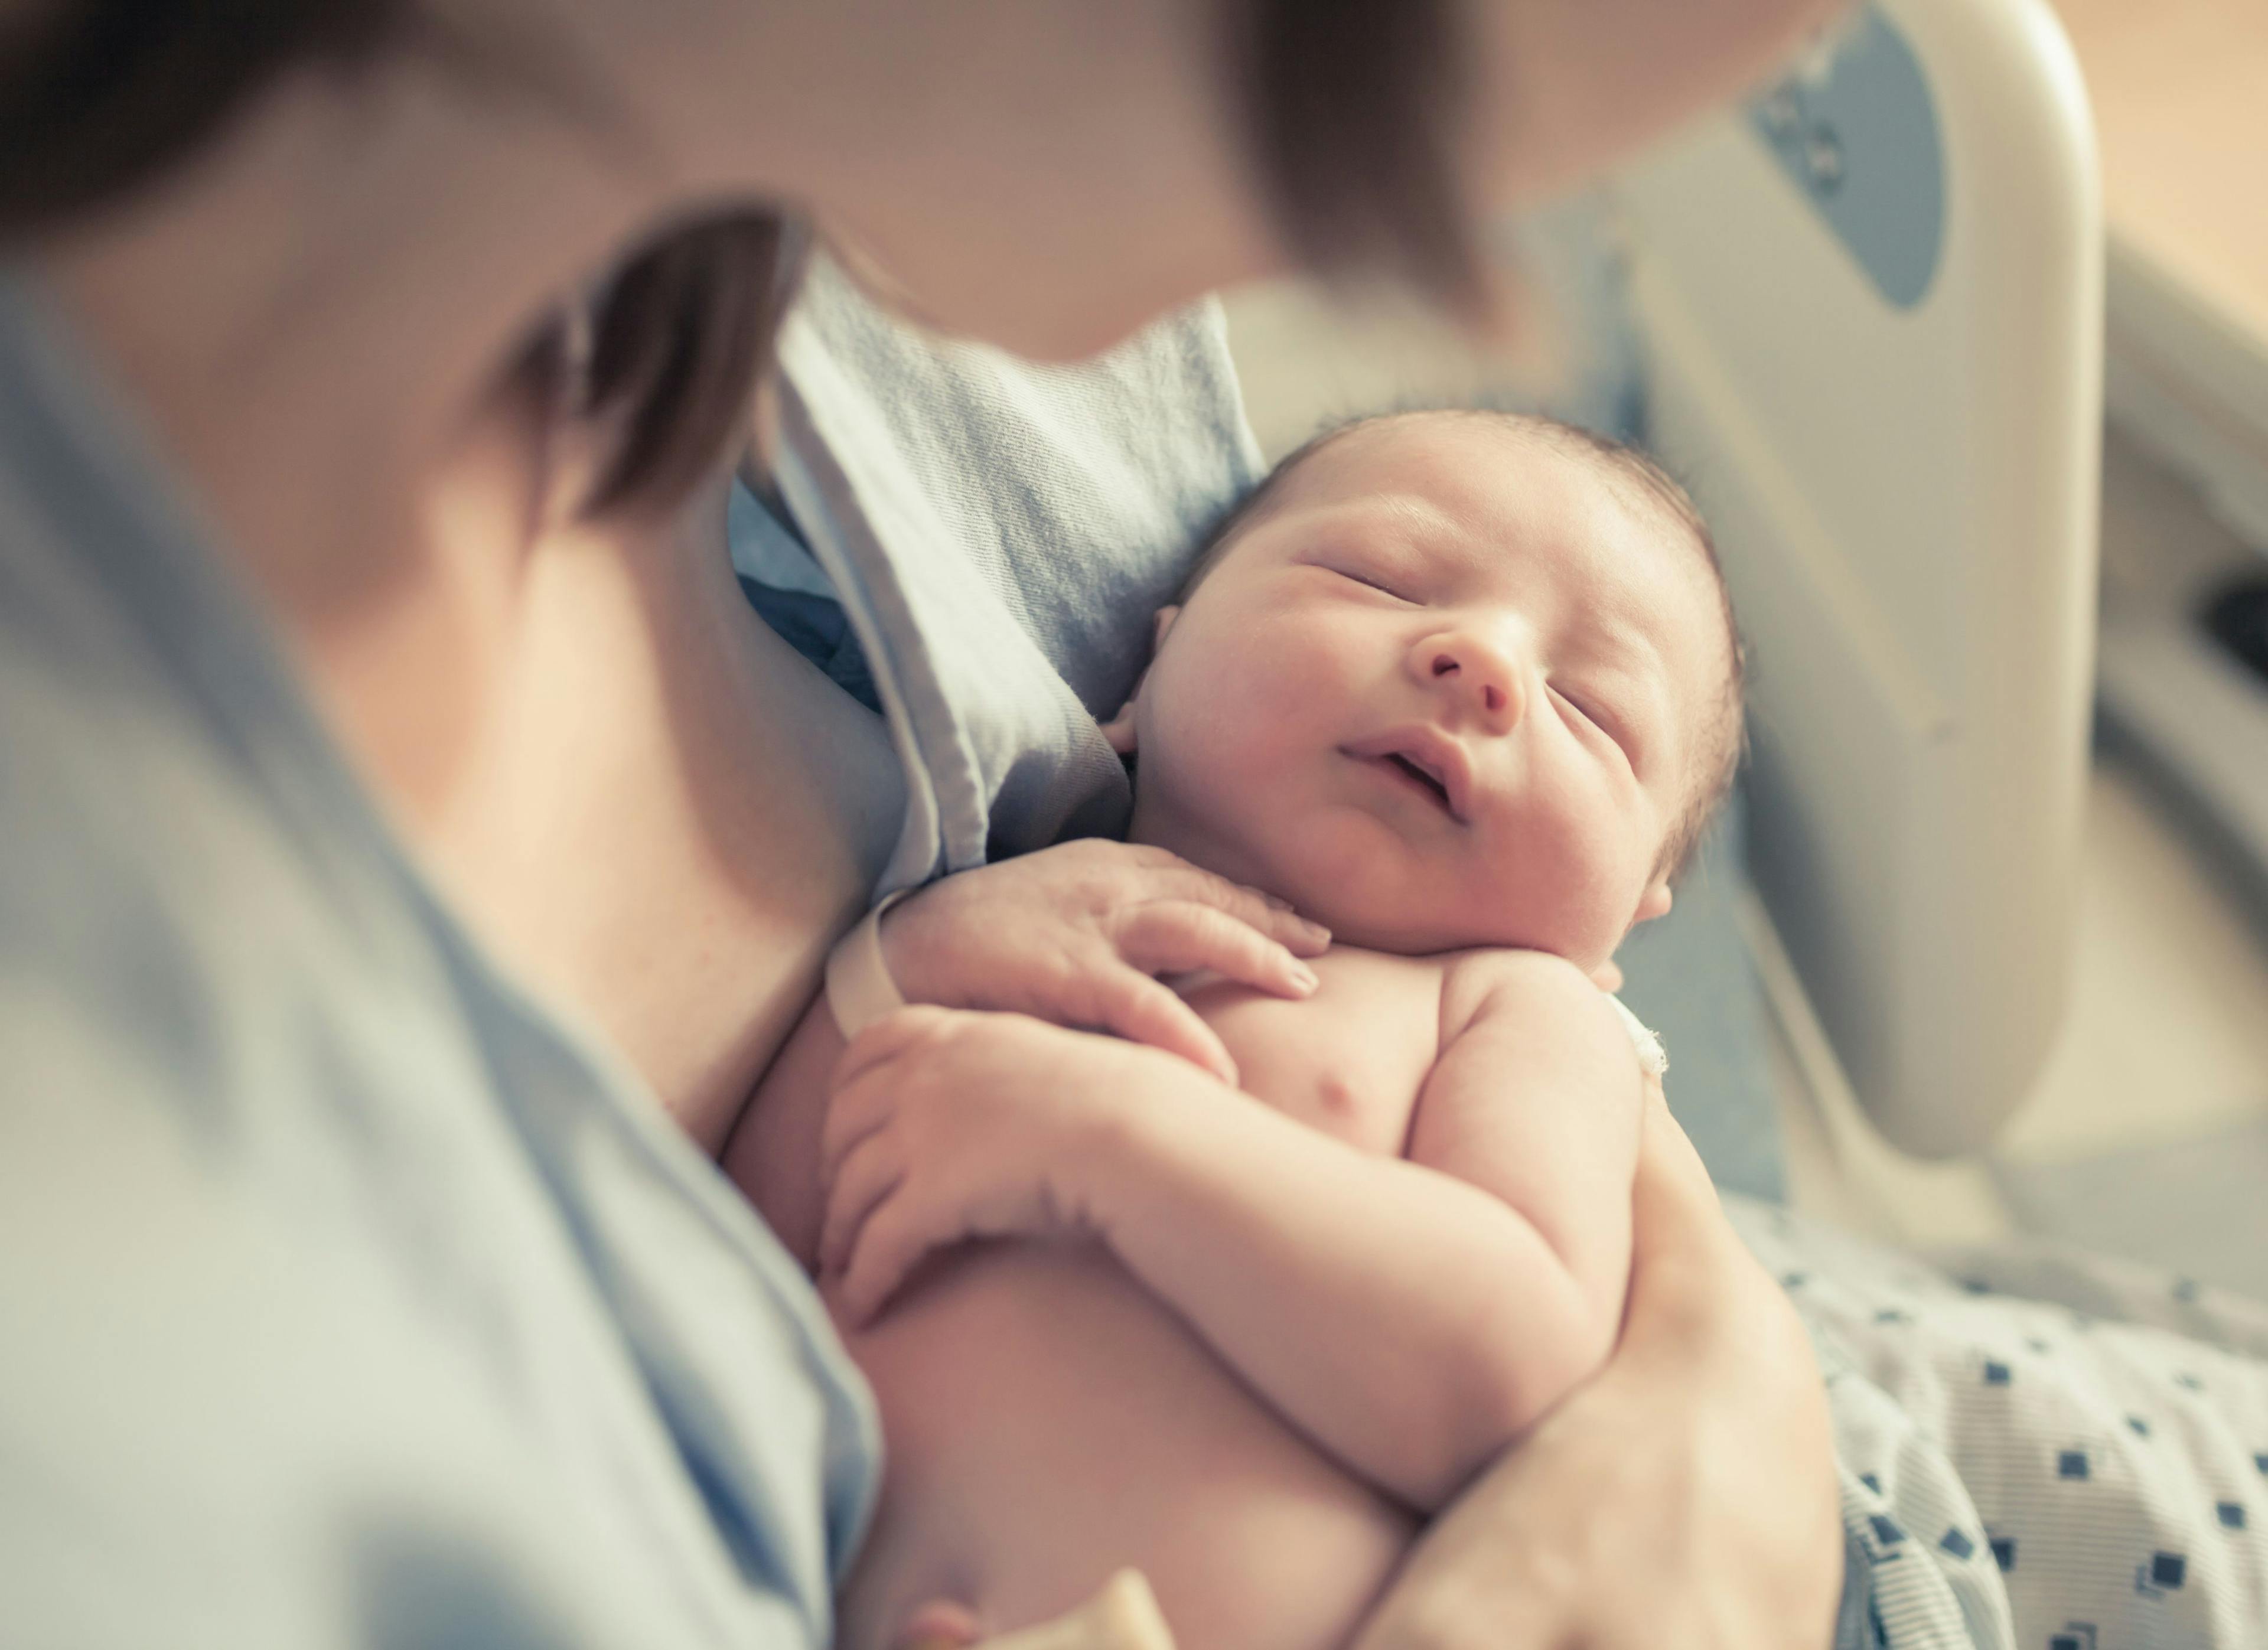 Dehydrated infant with fast breathing and sunken anterior fontanel | Image Credit: © kieferpix - © kieferpix - stock.adobe.com.